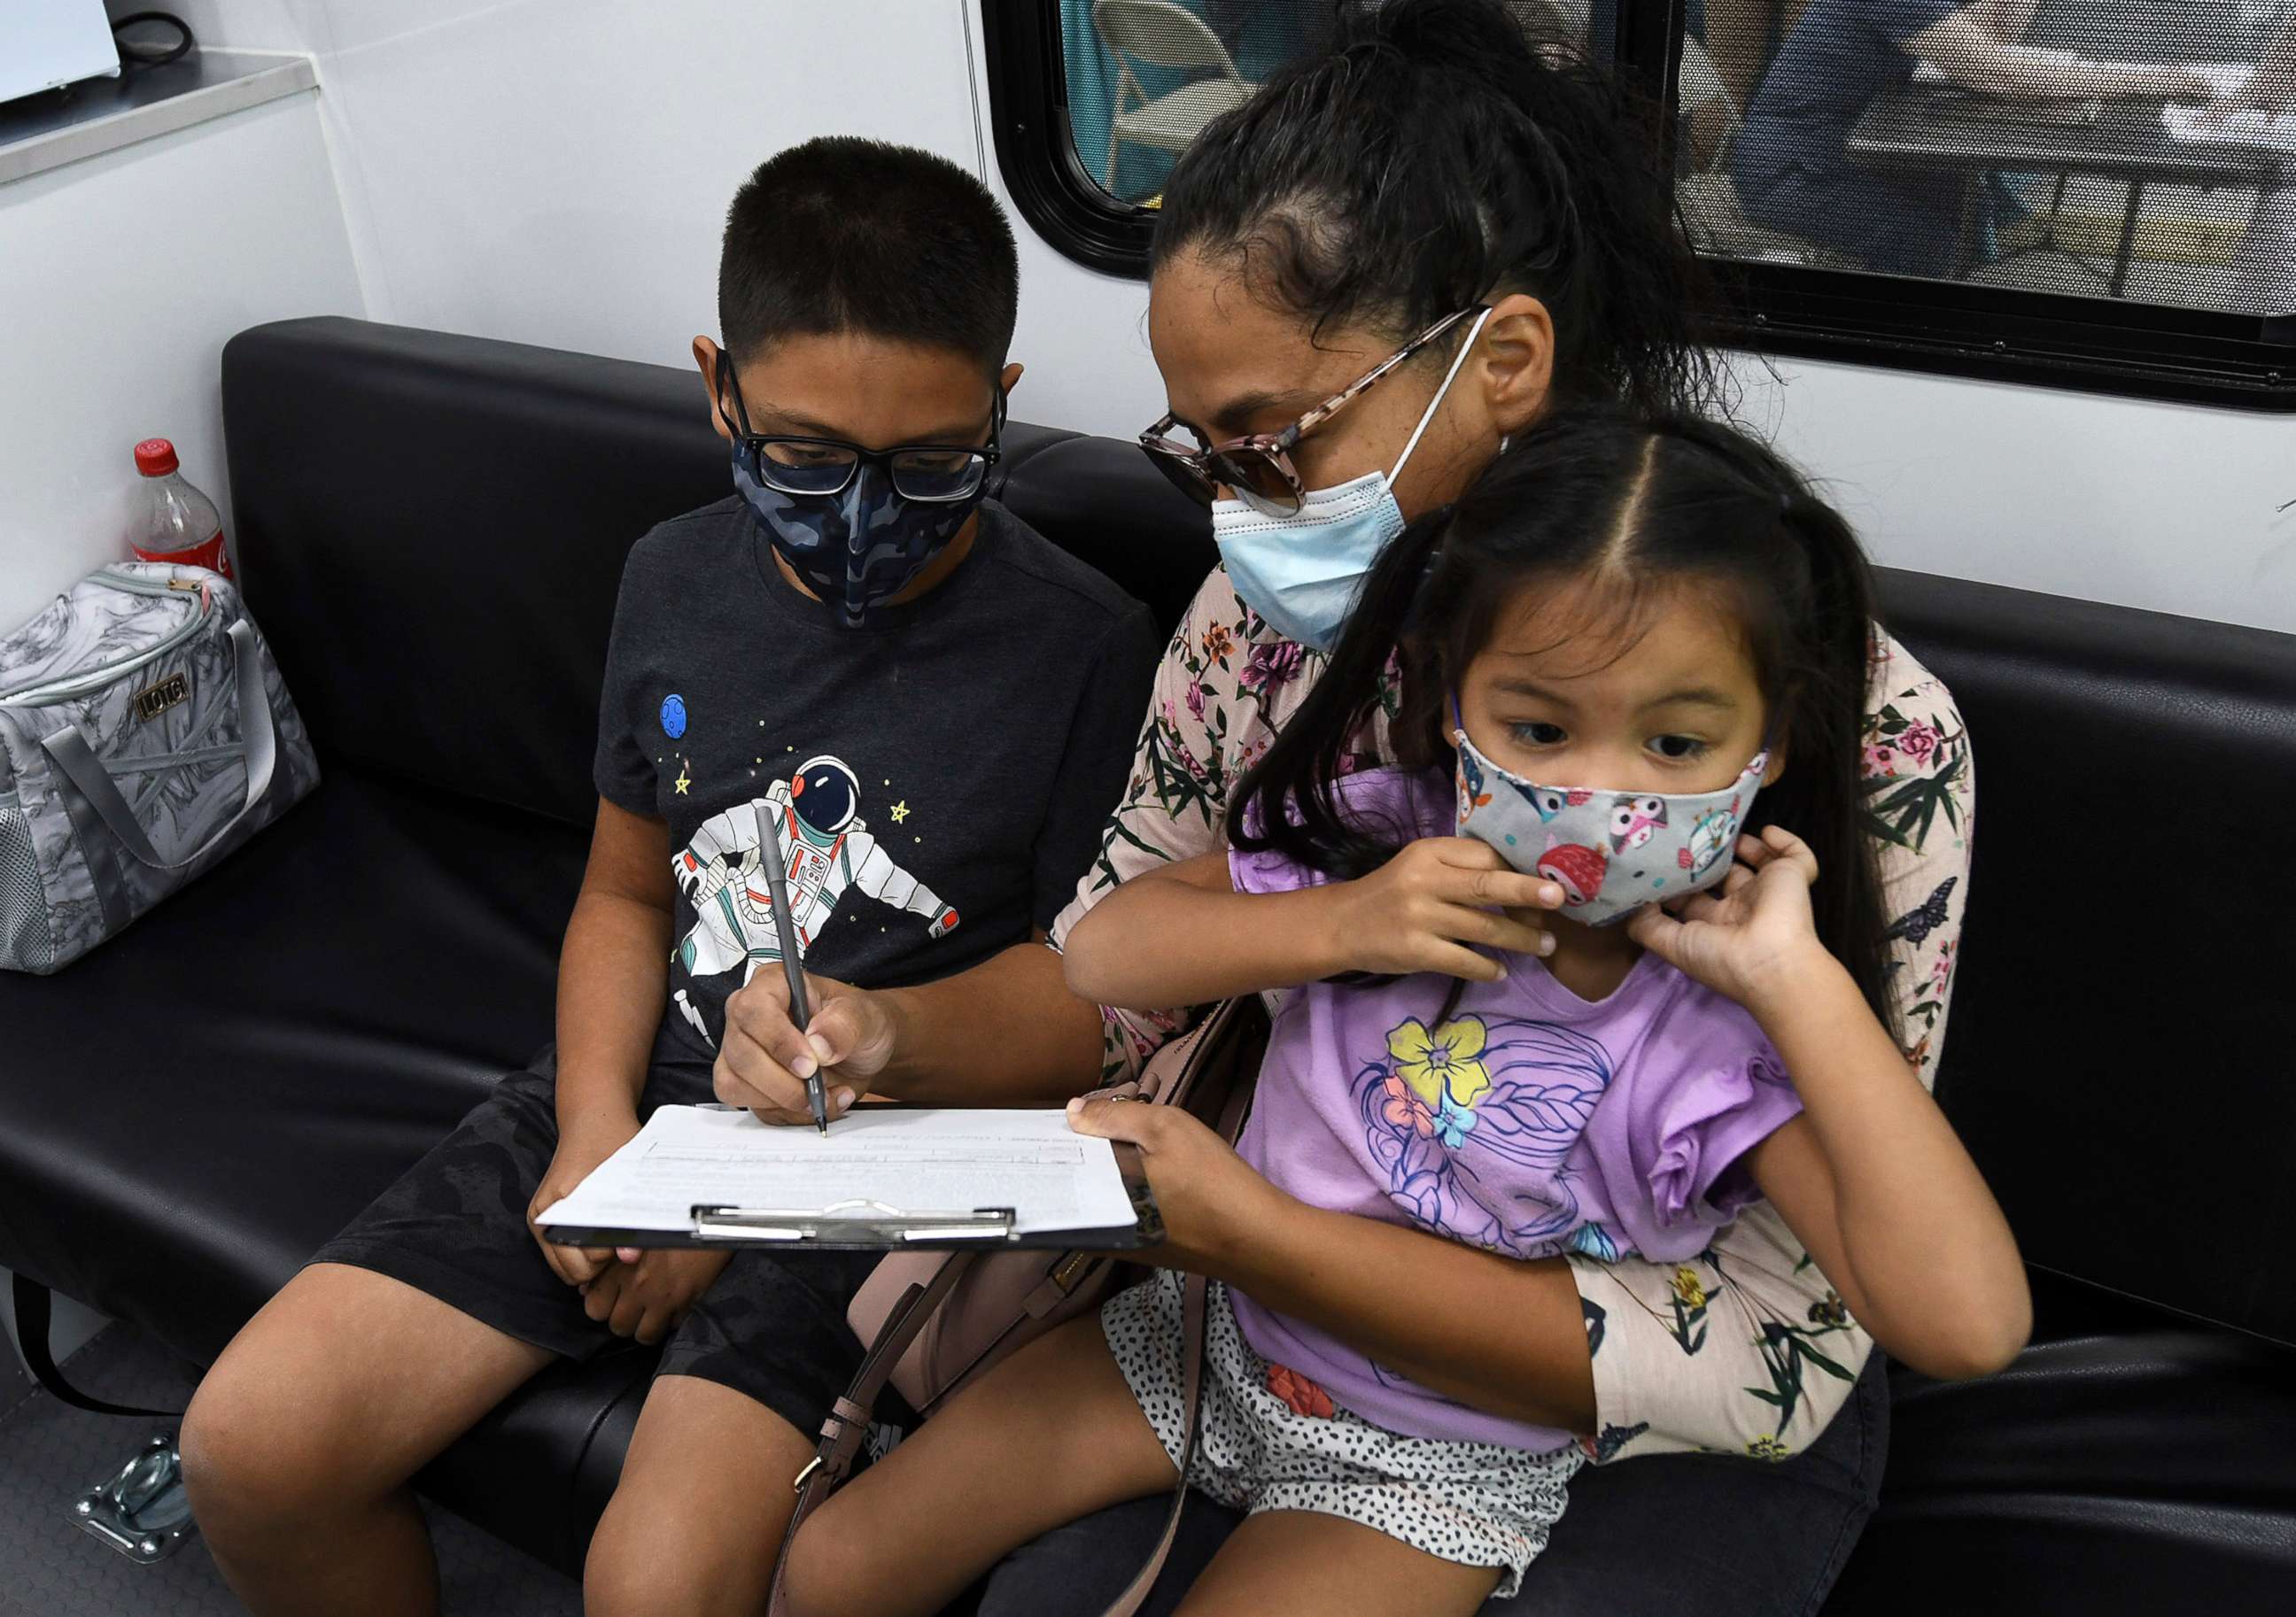 PHOTO: A boy waits while his mother signs a form required for him to receive a shot of the Pfizer COVID-19 vaccine at a mobile vaccination site on May 22, 2021, in Orlando, Fla.